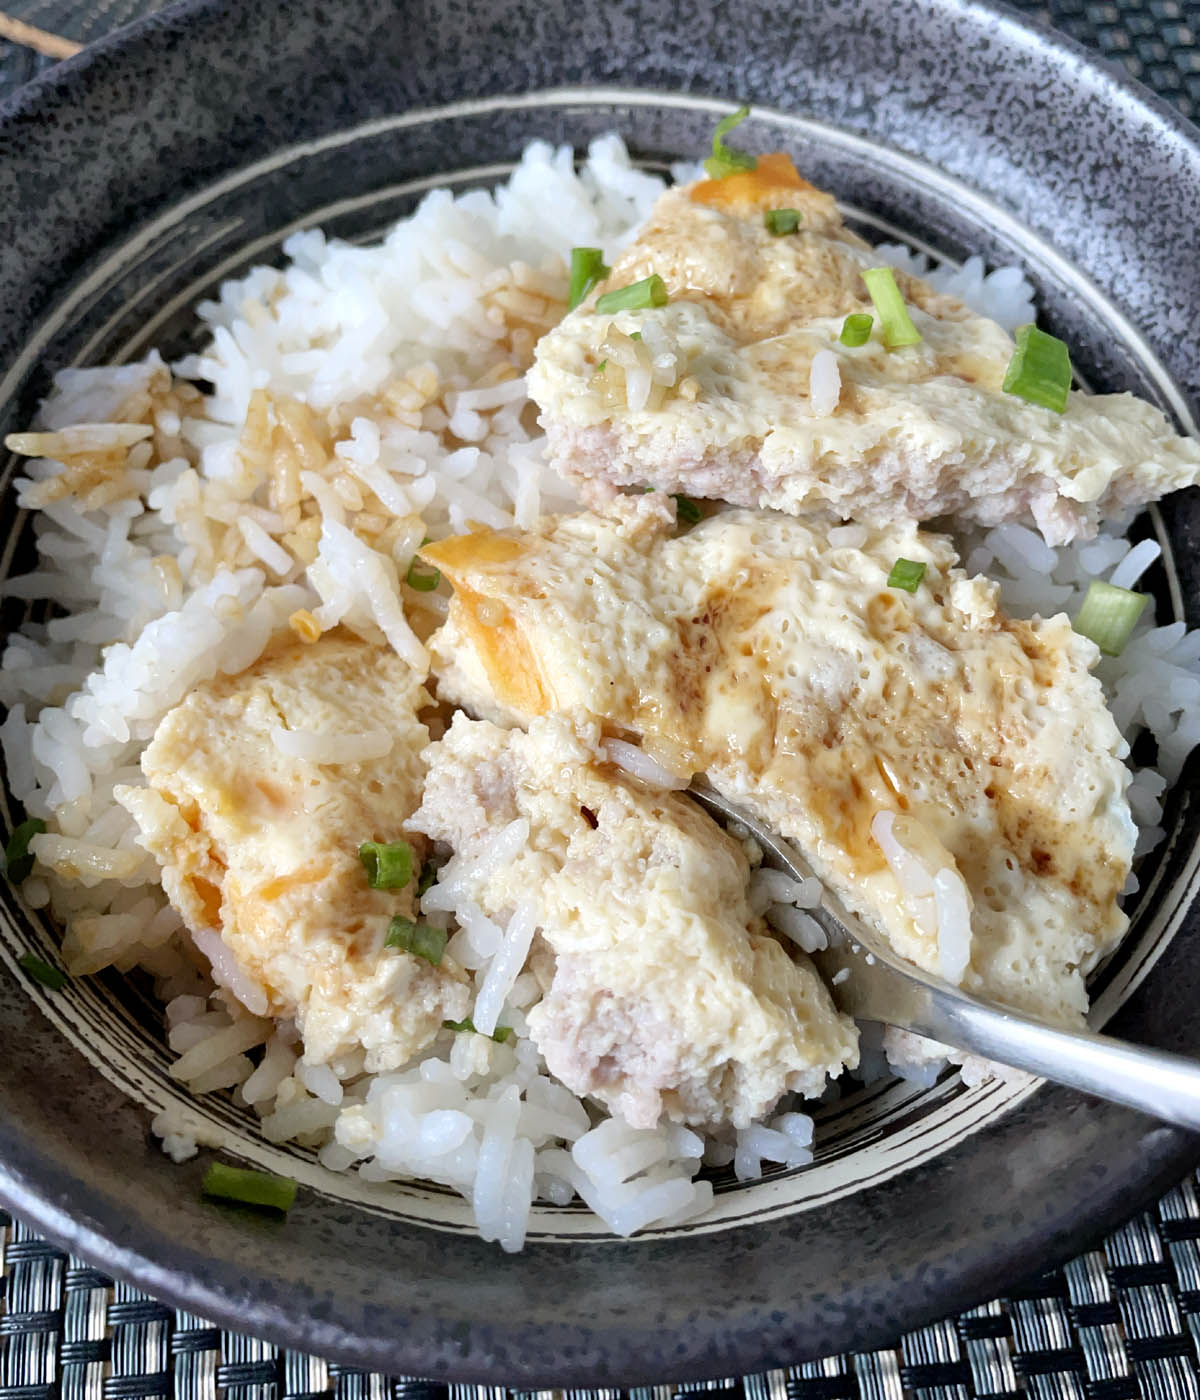 A metal spoon in a dark round bowl containing steamed egg and minced pork patty and white rice.